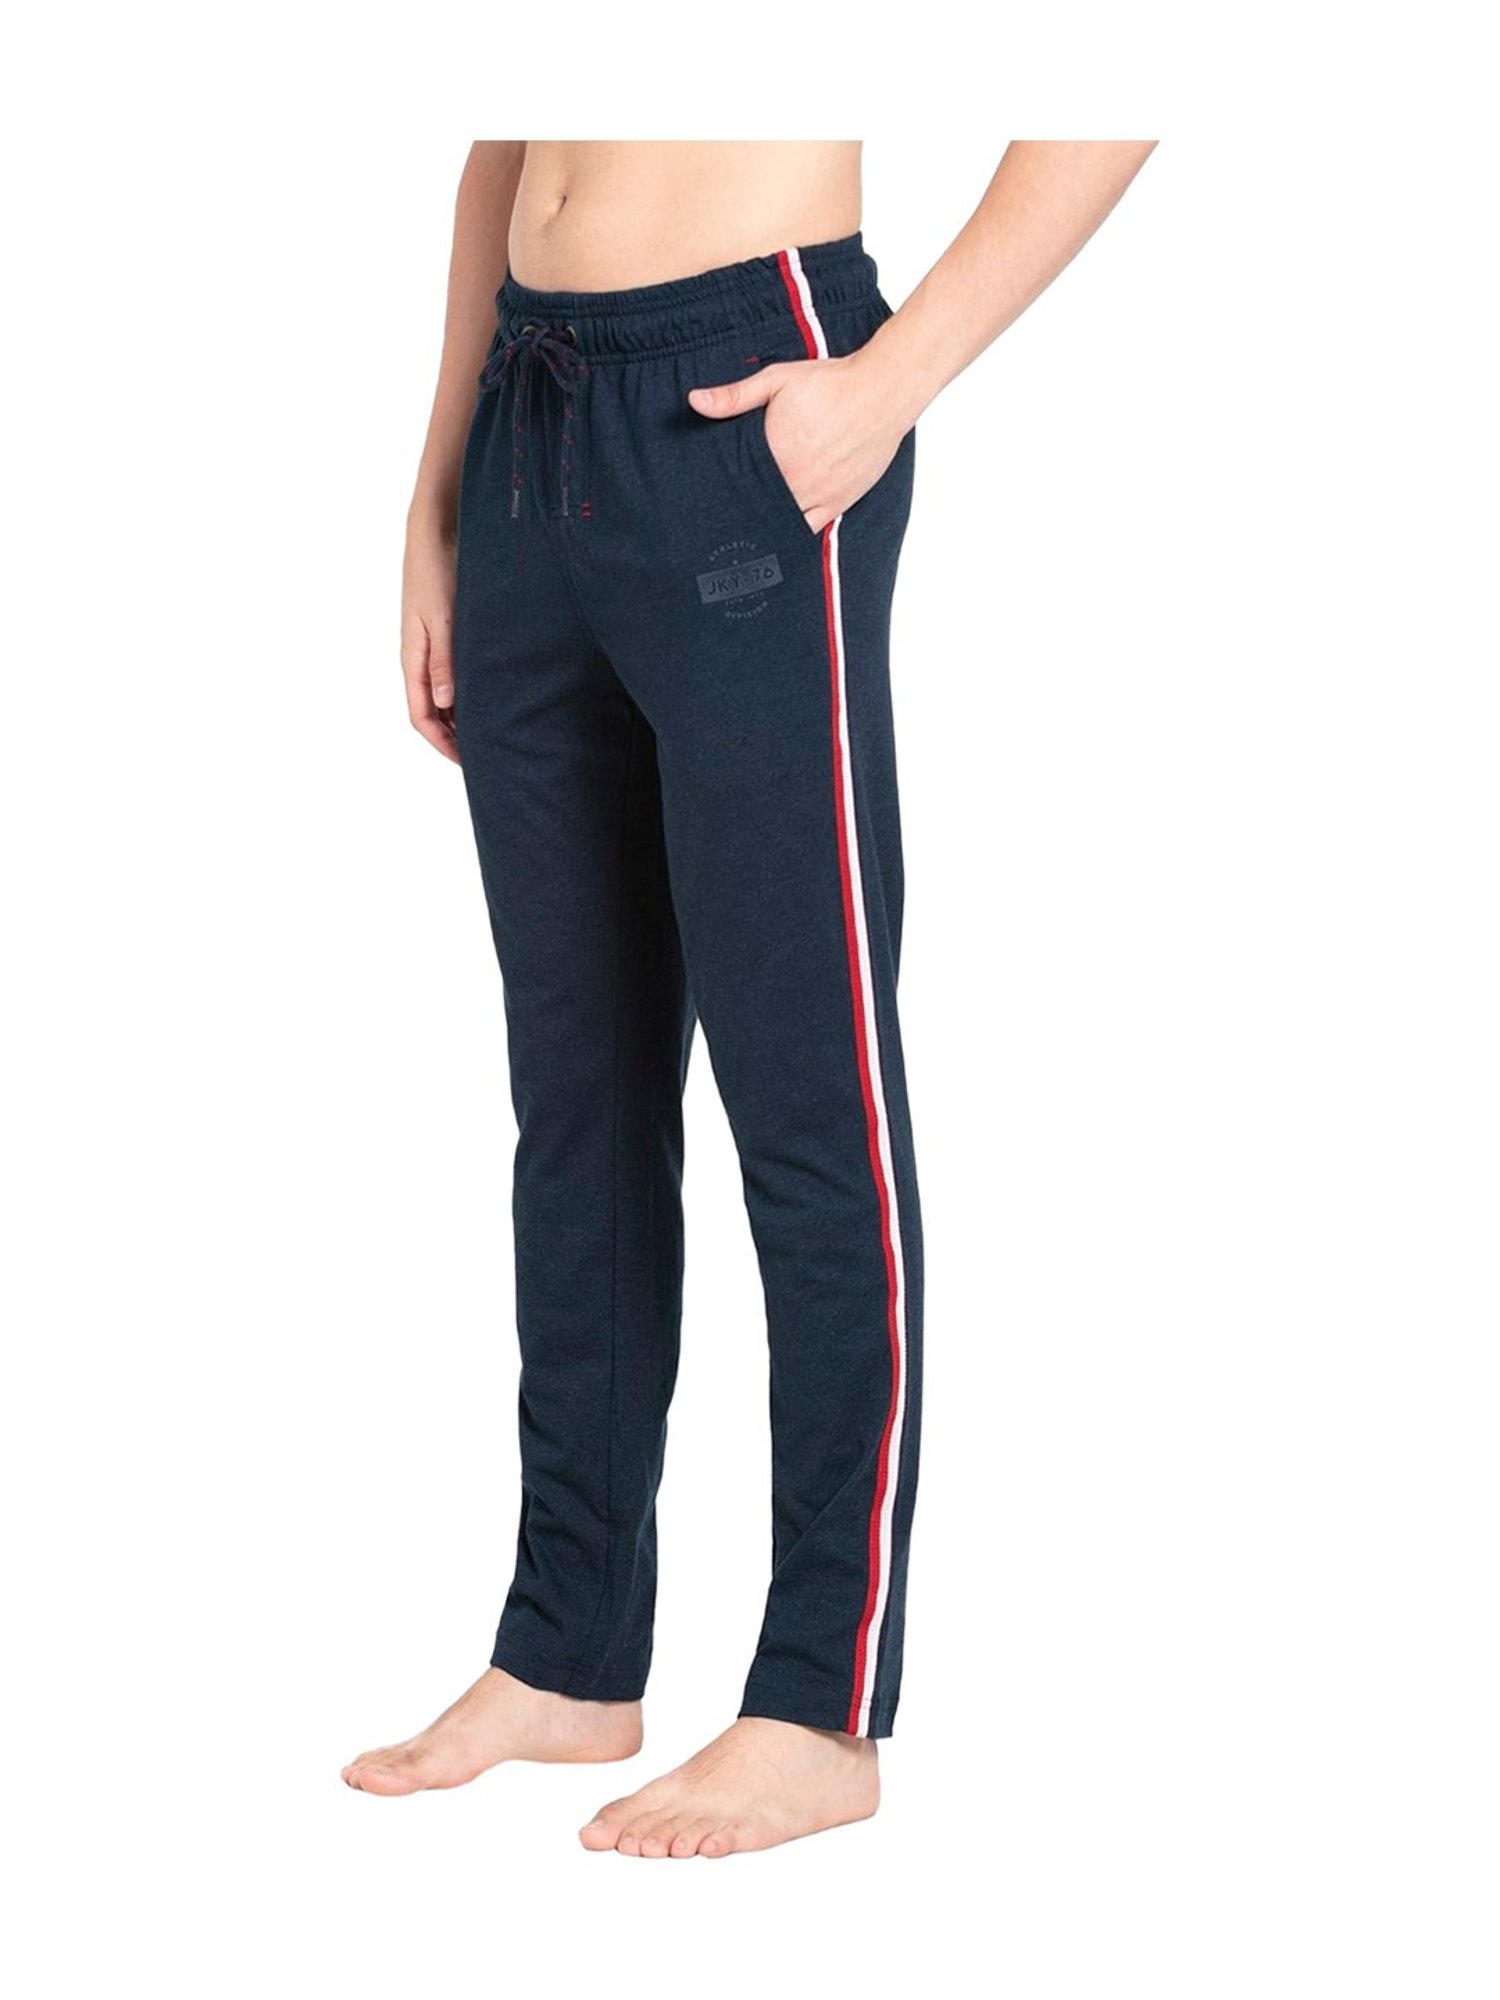 Wholesale Jockey Mens Cotton Track Pants 6109 with best liquidation deal   Excess2sell